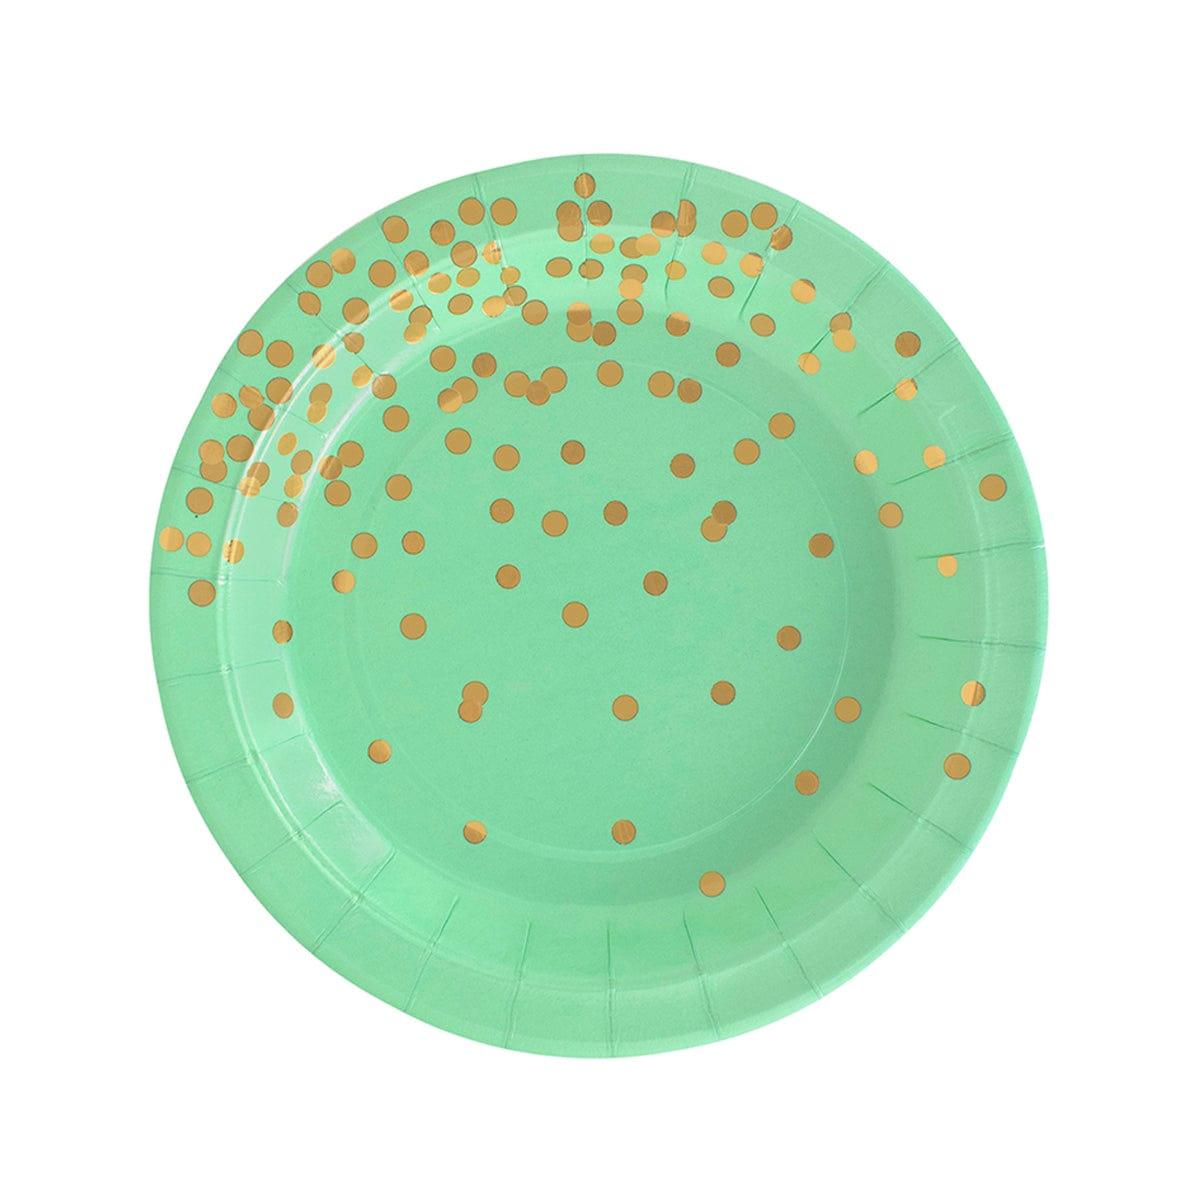 YIWU SANDY PAPER PRODUCTS CO., LTD Everyday Entertaining Mint Green Confetti Explosion Plates, 7 Inches, 8 Count